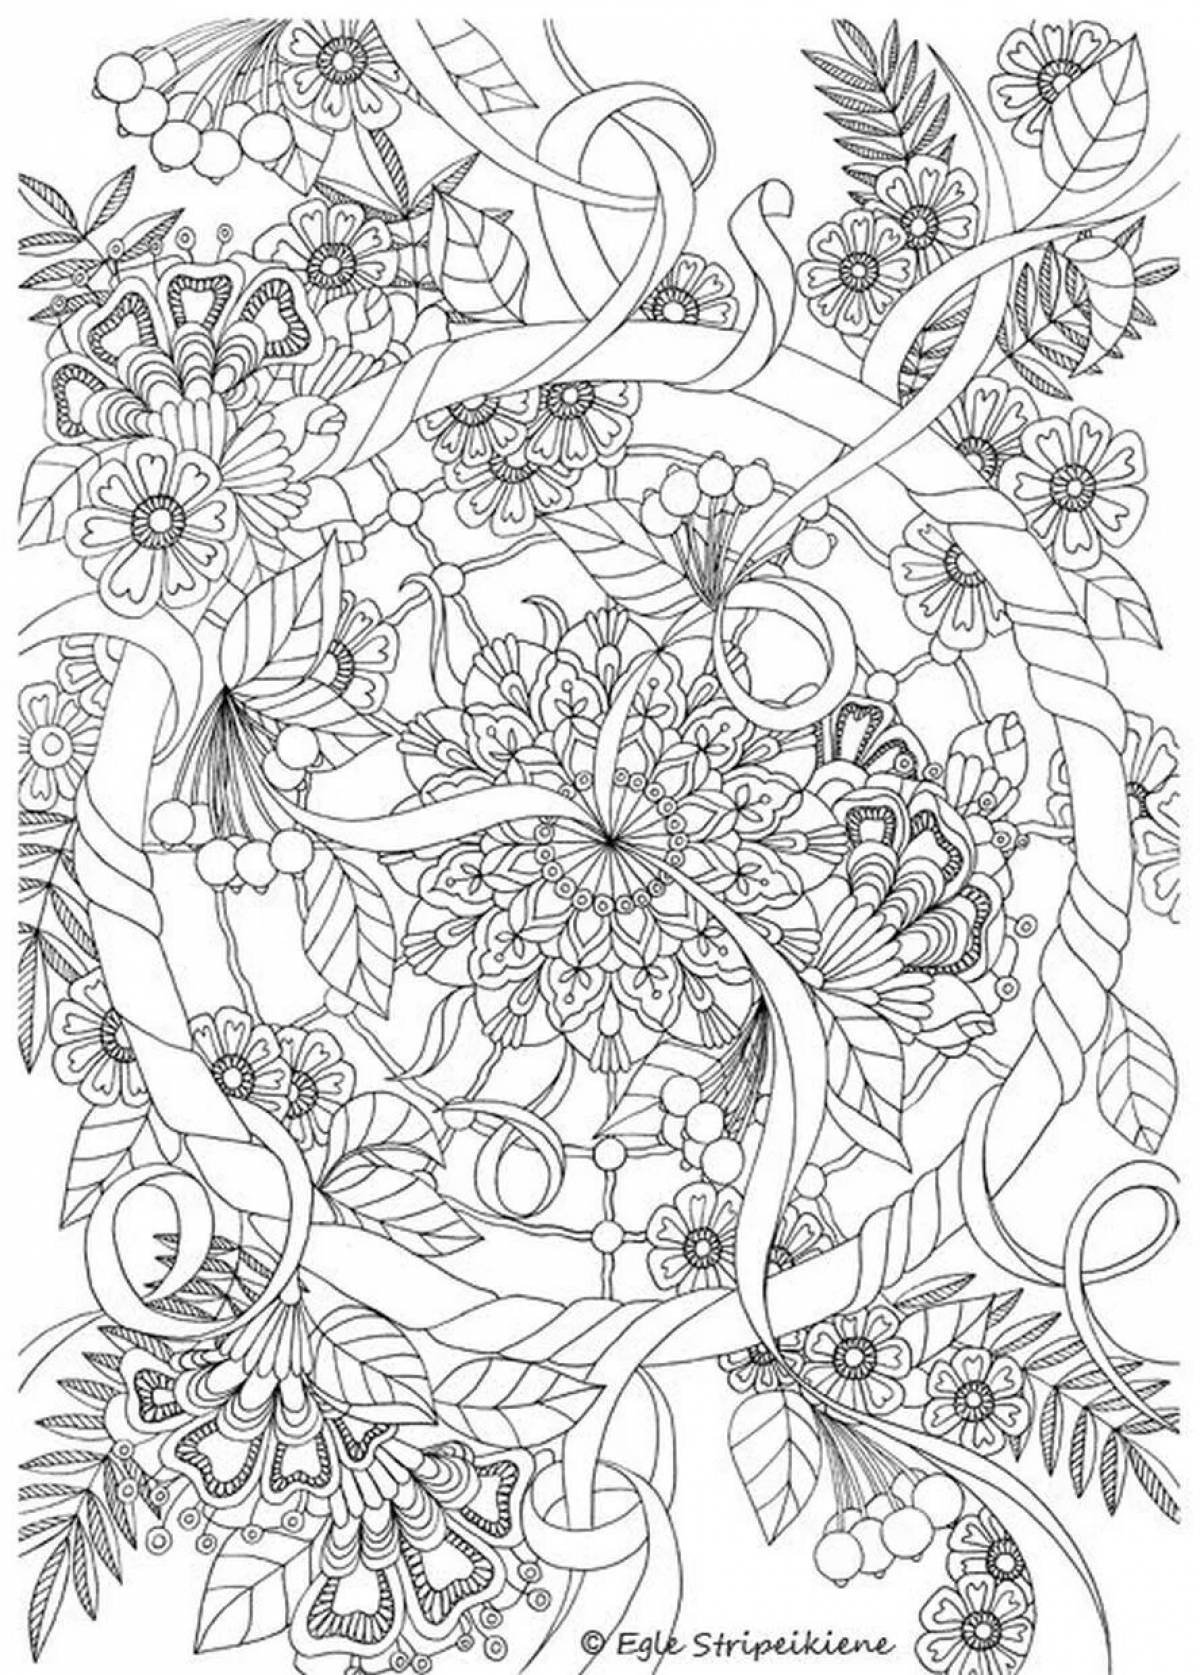 Great meditation coloring book for adults